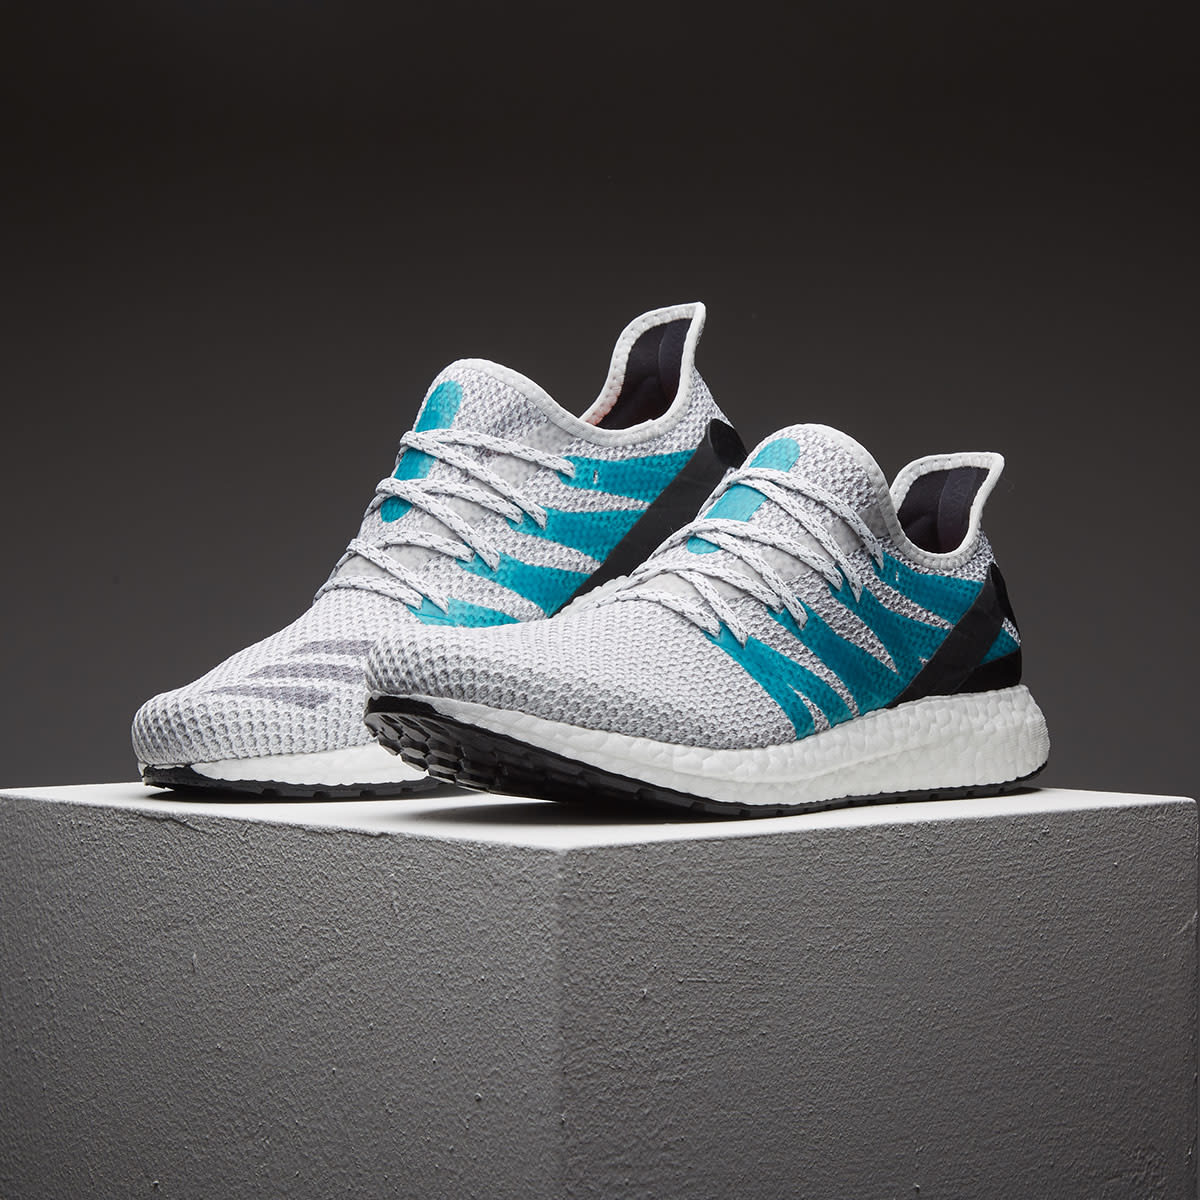 Adidas Speedfactory AM4 LDN 1.1 (White & Shock Green) | END. Launches